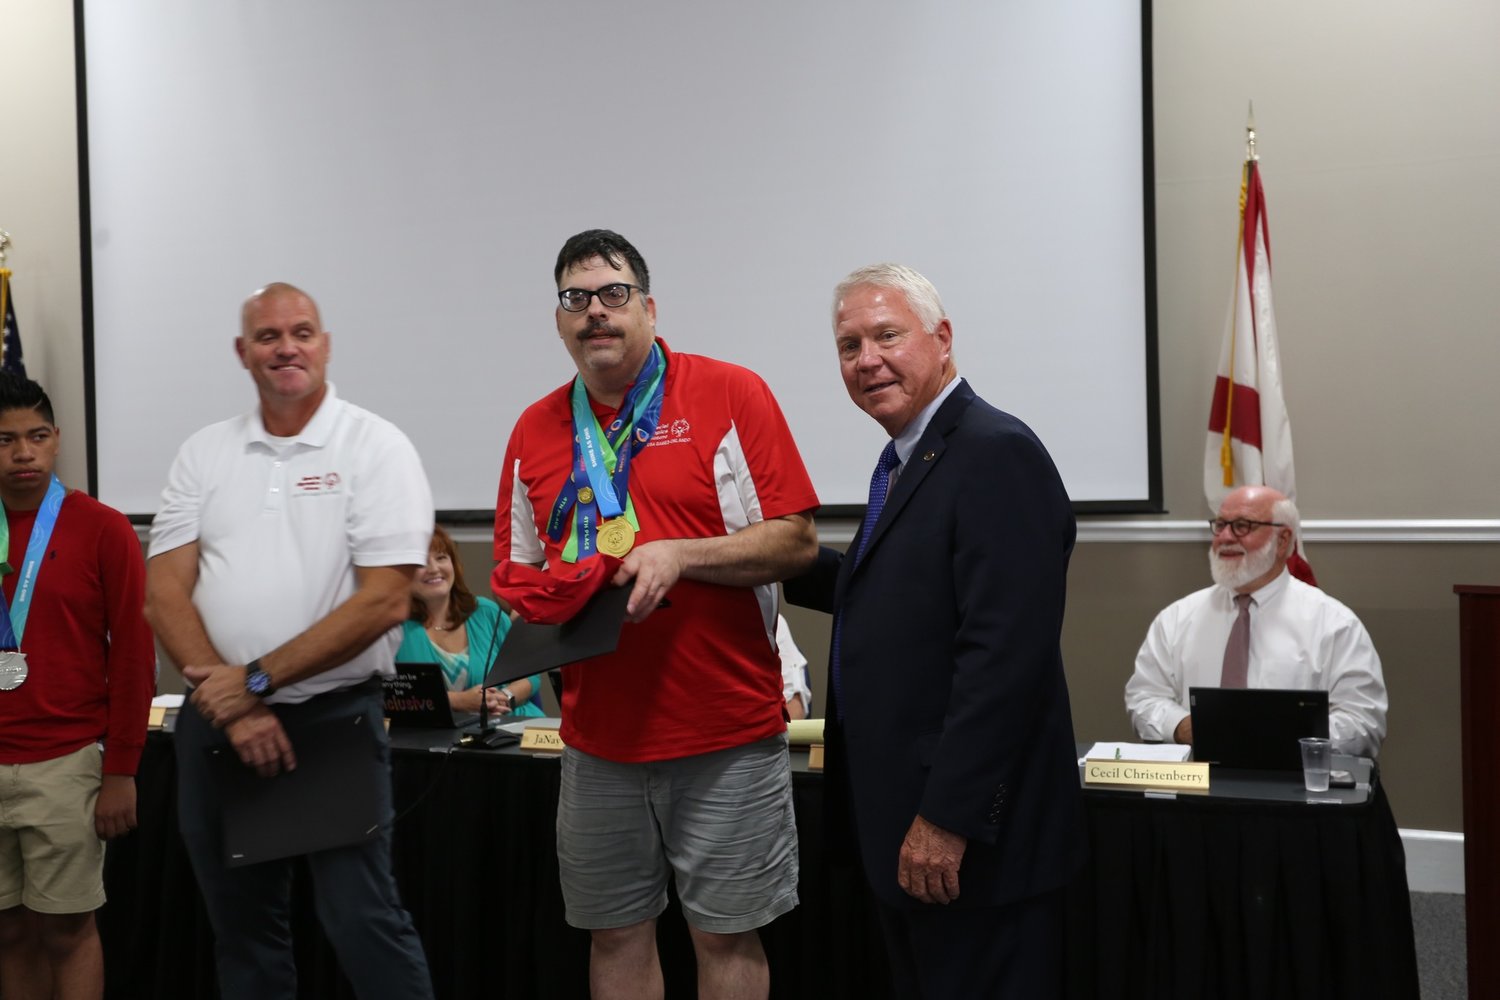 Jerry Wise returned to Baldwin County with a gold medal and three fourth-place medals after he registered a total weight of 237.5 pounds in the powerlifting competition during the USA Games in Orlando earlier this month. He was recognized at the June 23 meeting of the Baldwin County Board of Education.